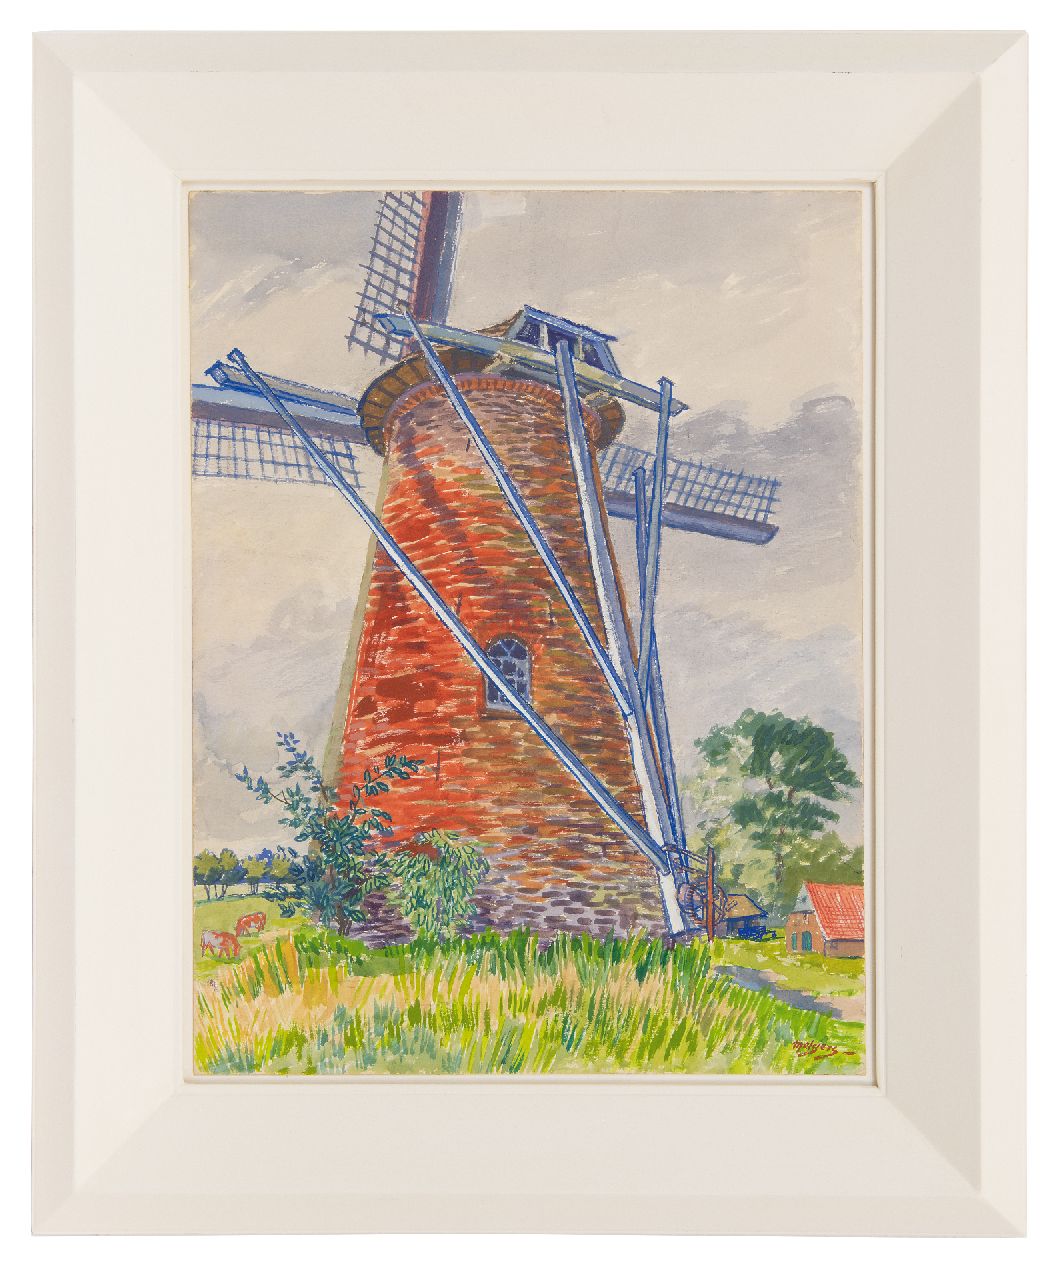 Melgers H.J.  | Hendrik Johan 'Henk' Melgers | Watercolours and drawings offered for sale | Windmill in Saasveld, gouache on paper 49.4 x 37.2 cm, signed l.r.